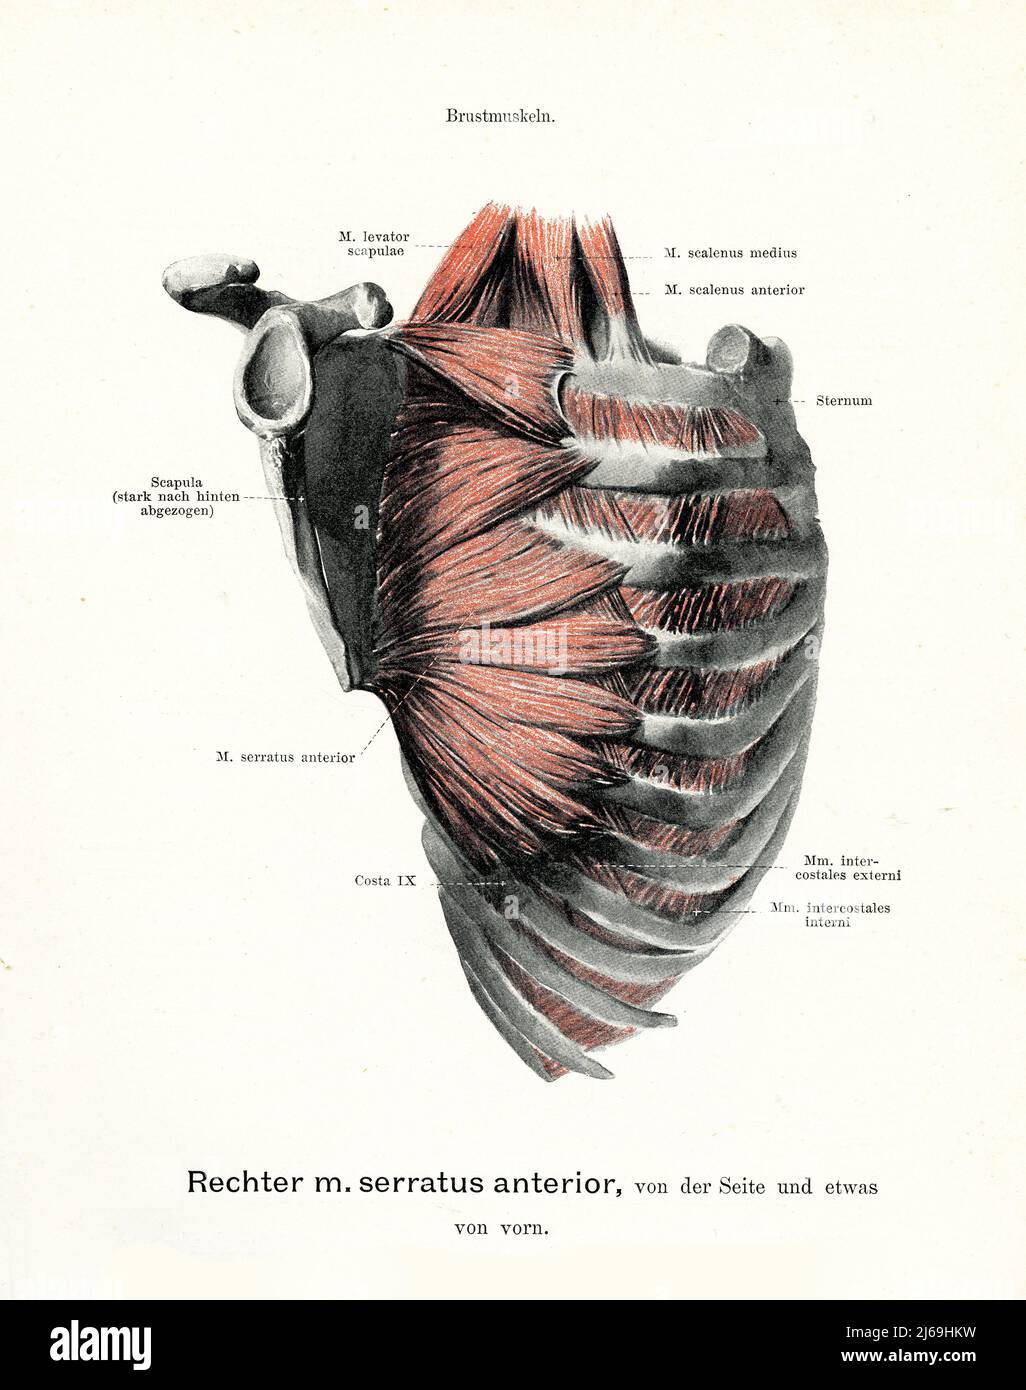 Vintage illustration of anatomy, serratus anterior right muscle connecting scapula with ribs, with German anatomical descriptions Stock Photo